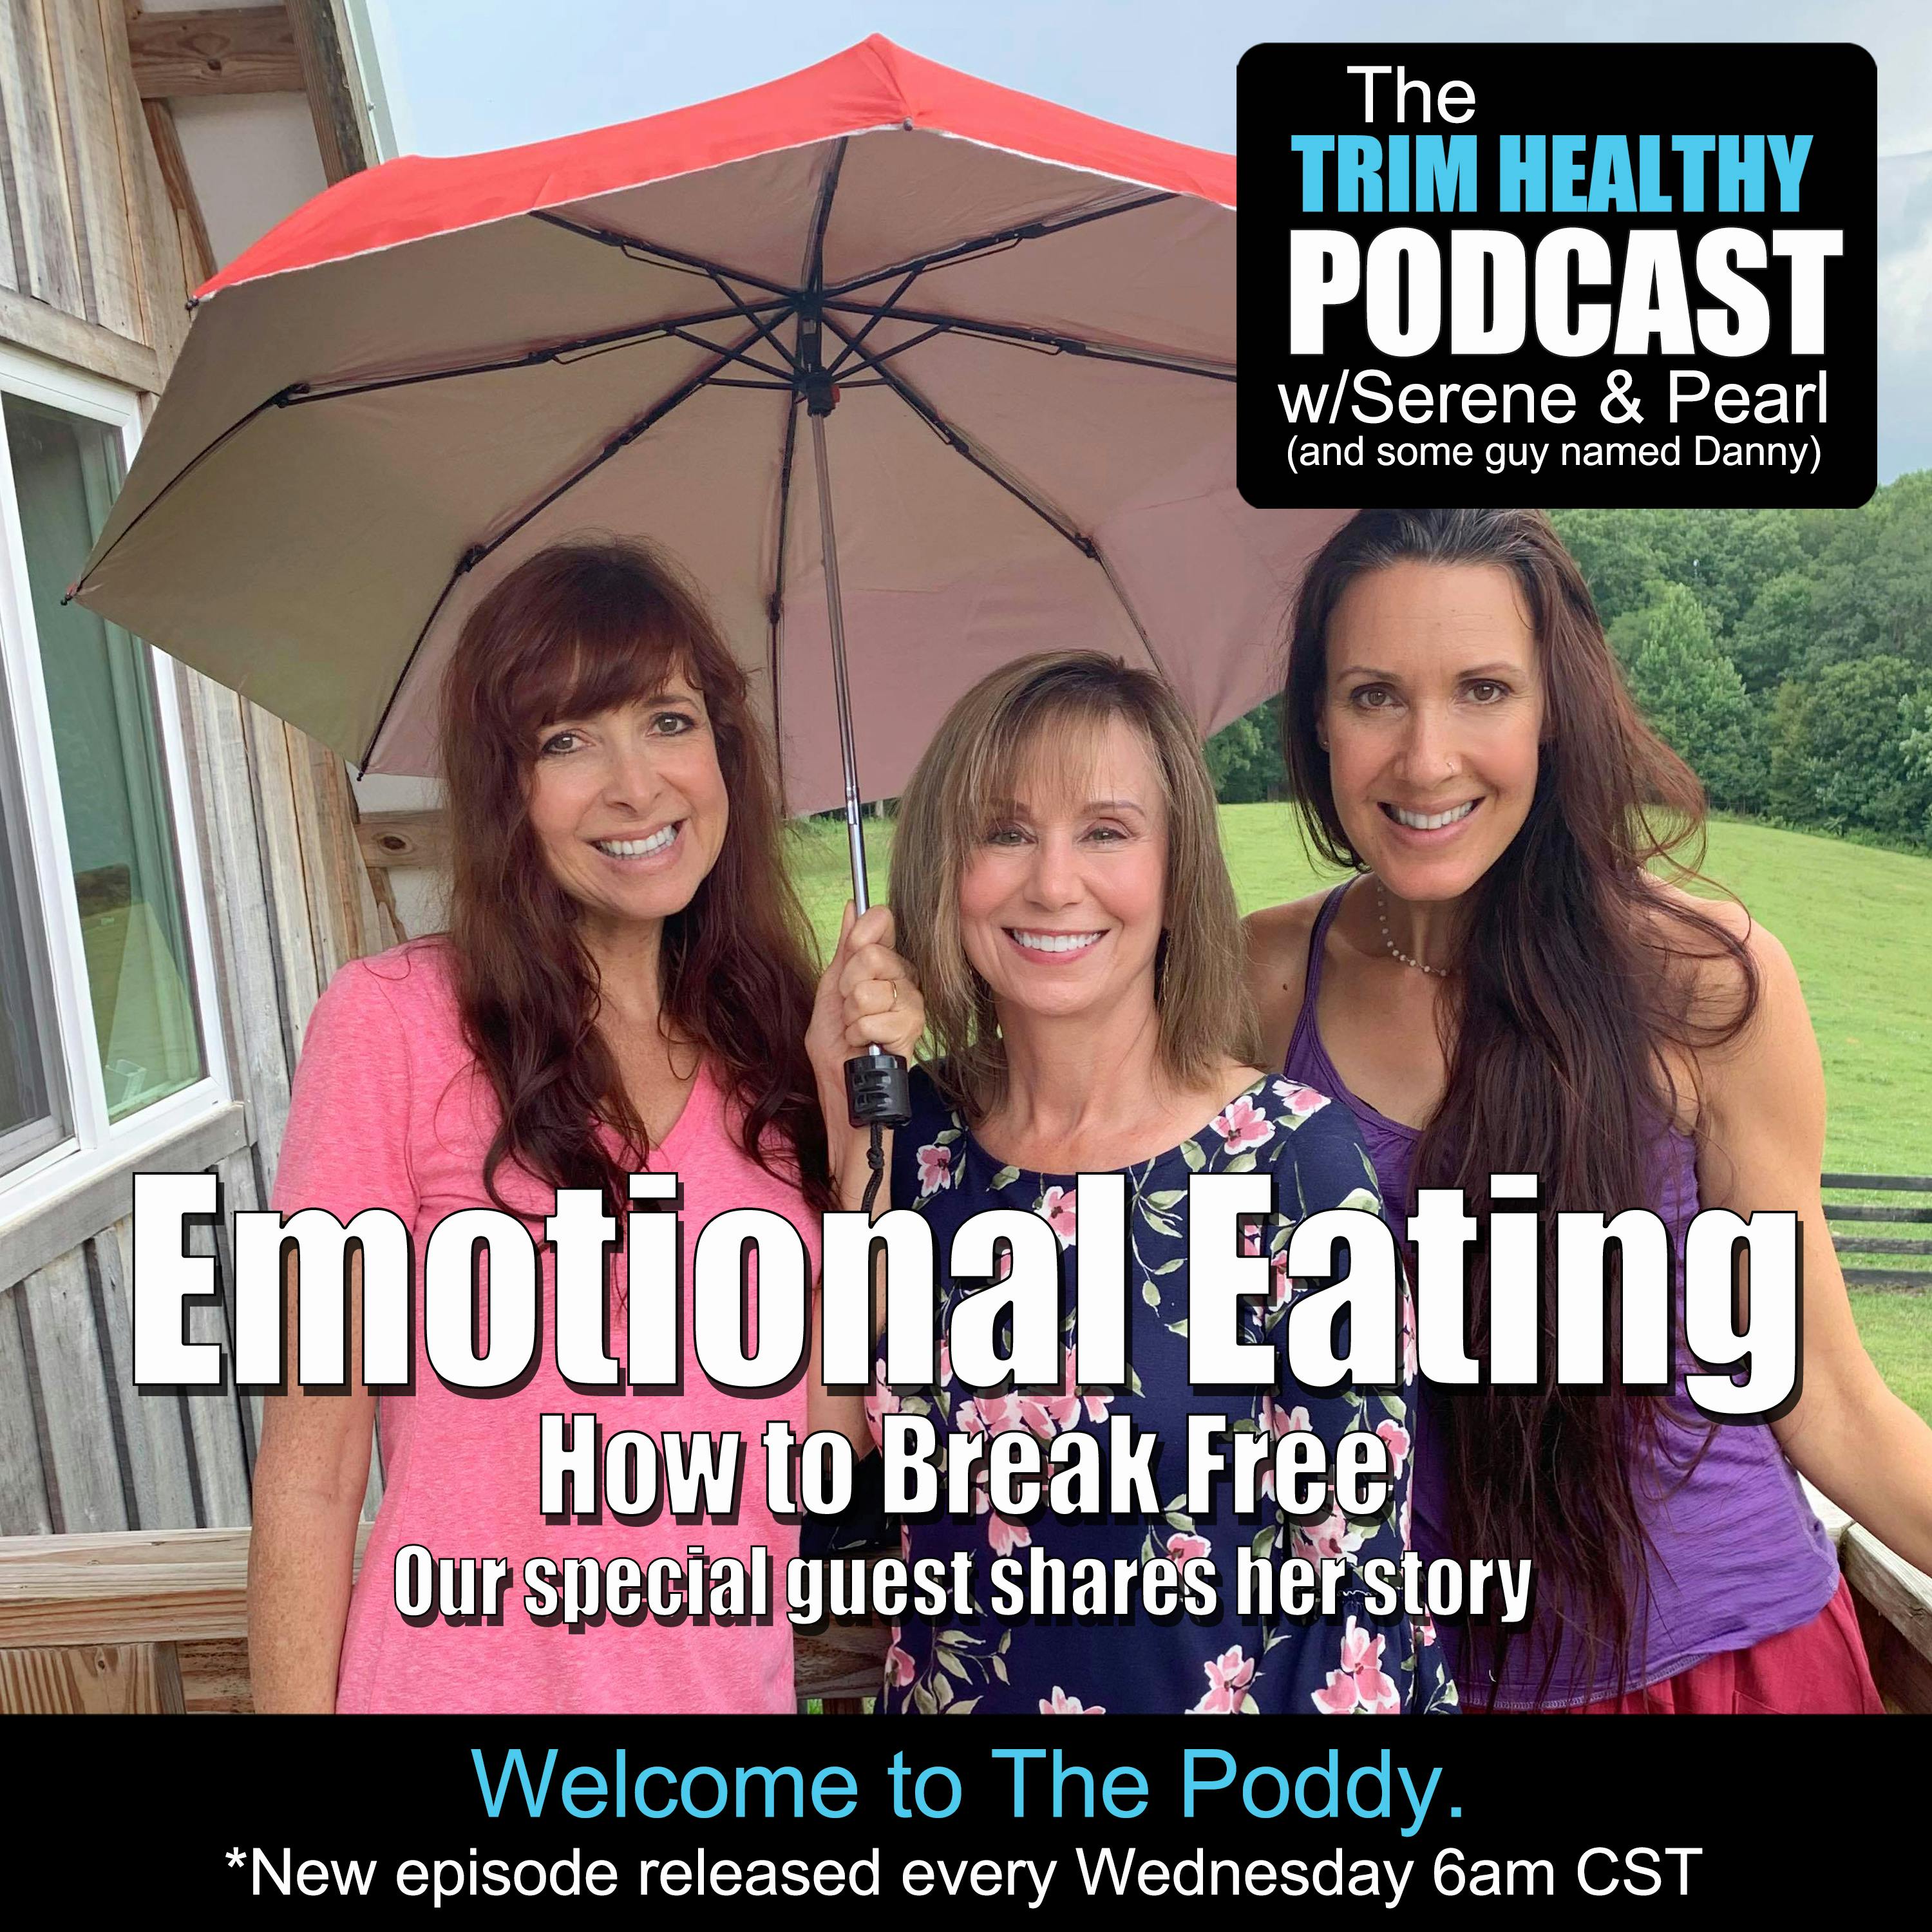 Ep 235: Emotional Eating: How to Break Free. Our special guest shares her story.